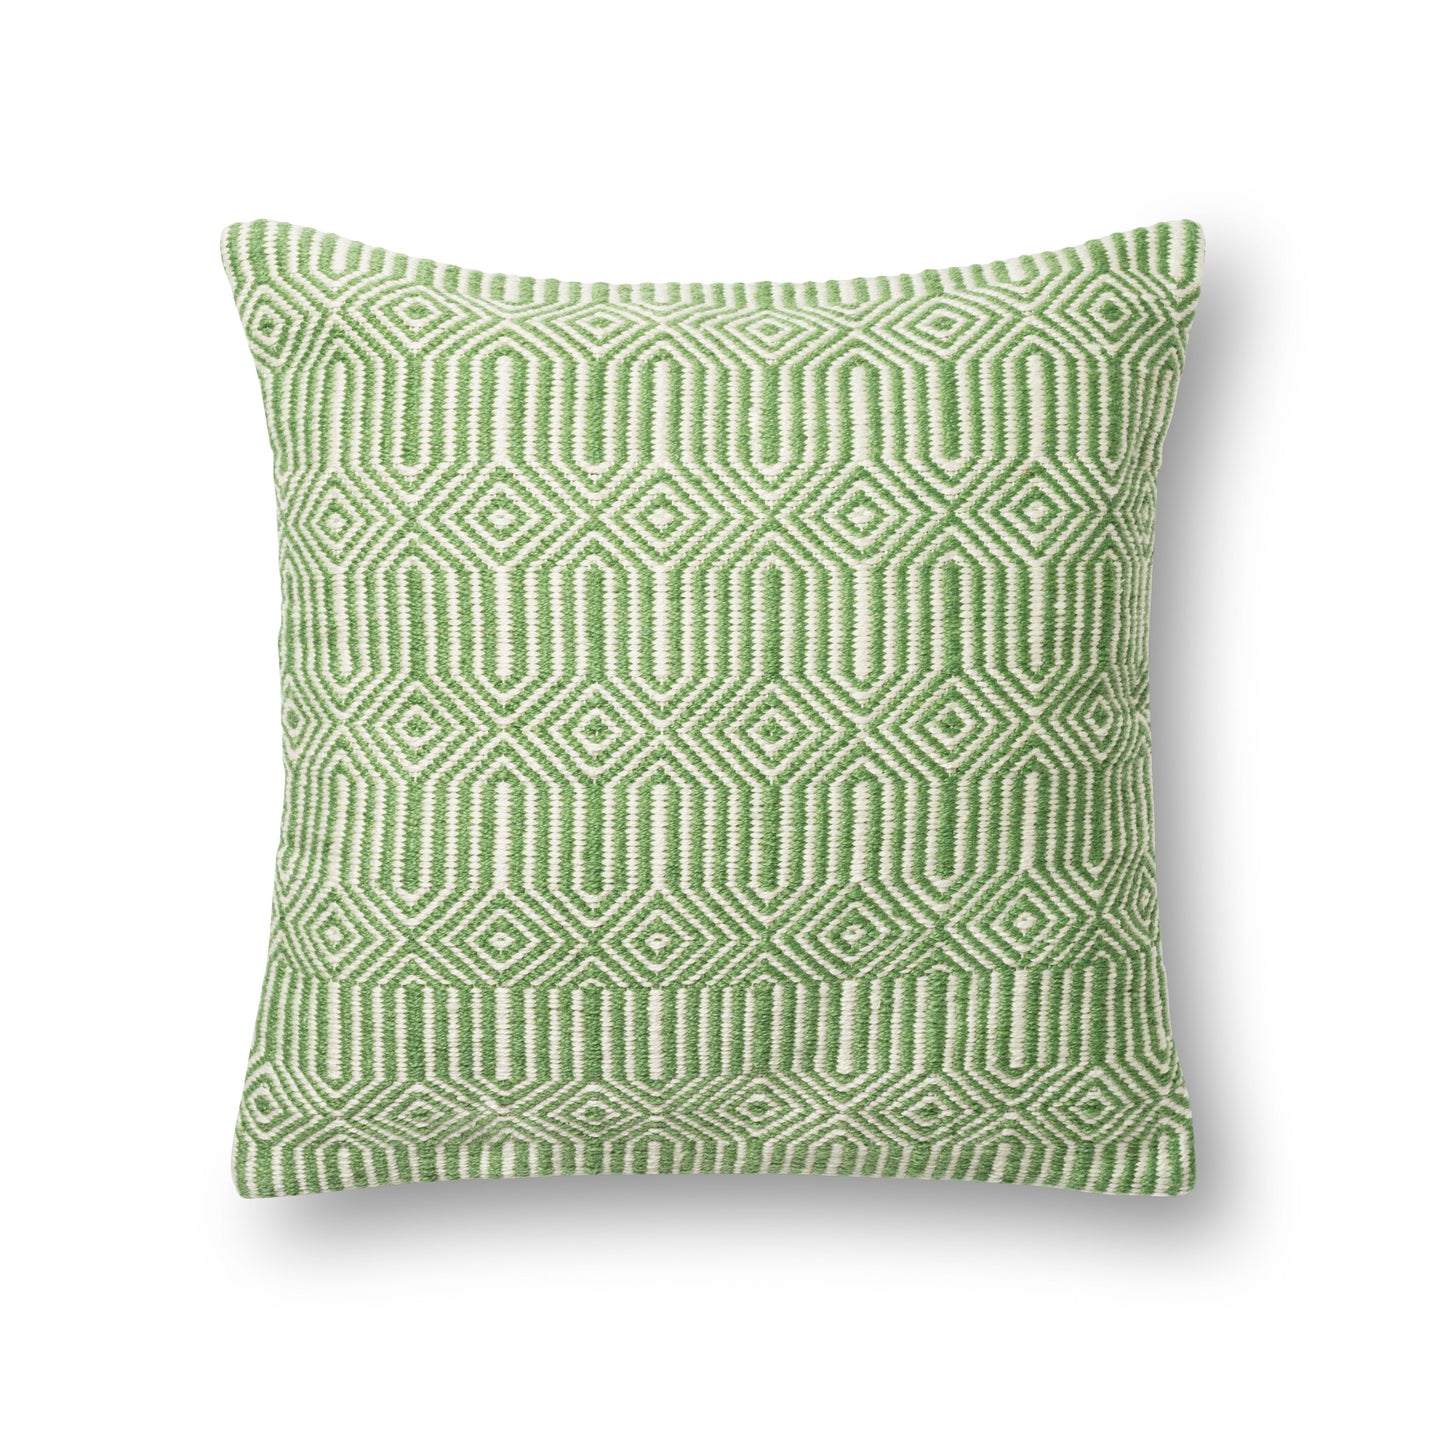 Photo of a pillow;  P0339 Green / Ivory 22" x 22" Cover w/Poly Pillow